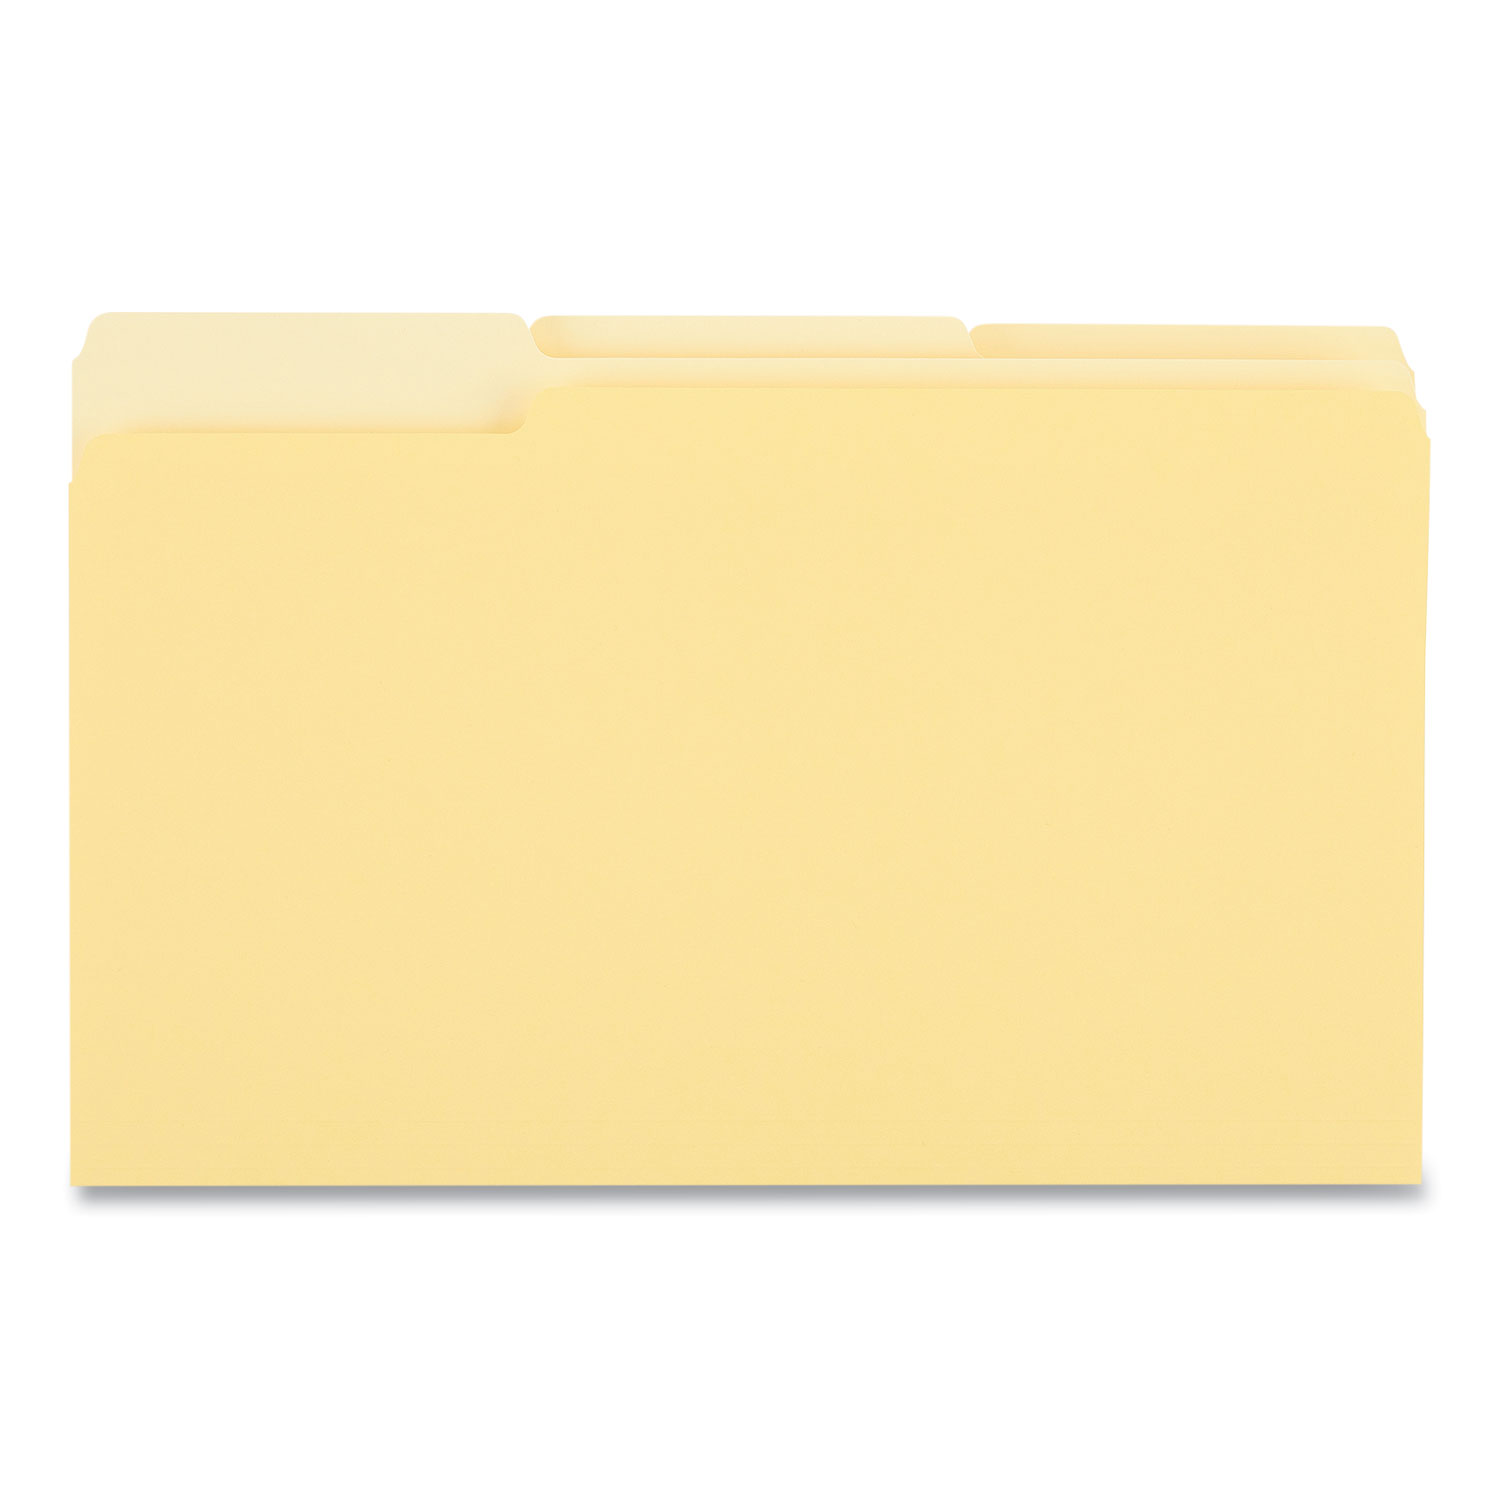 Deluxe Colored Top Tab File Folders, 1/3-Cut Tabs: Assorted, Legal Size, Yellow/Light Yellow, 100/Box